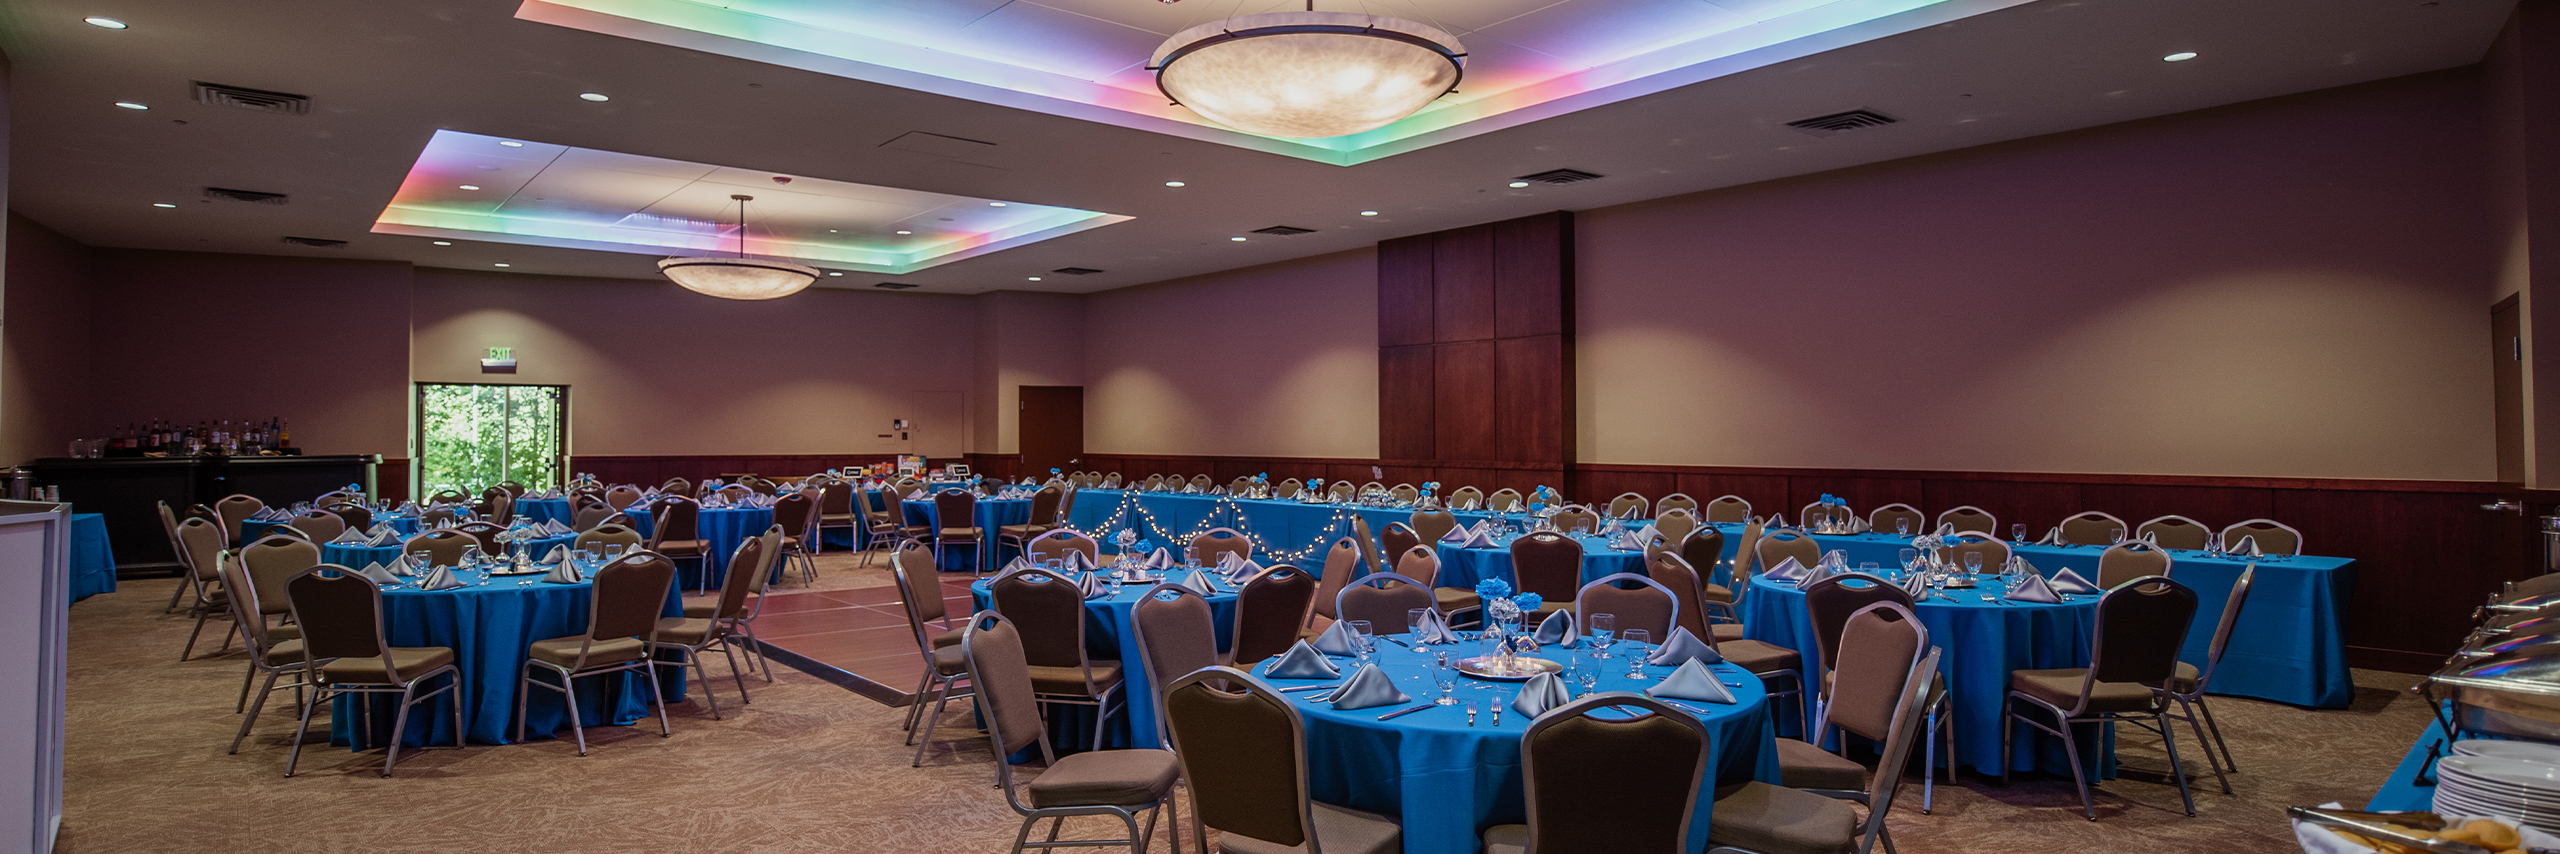 Photo of Columbine Room set up for a reception with colorful lights and blue tablecloths.